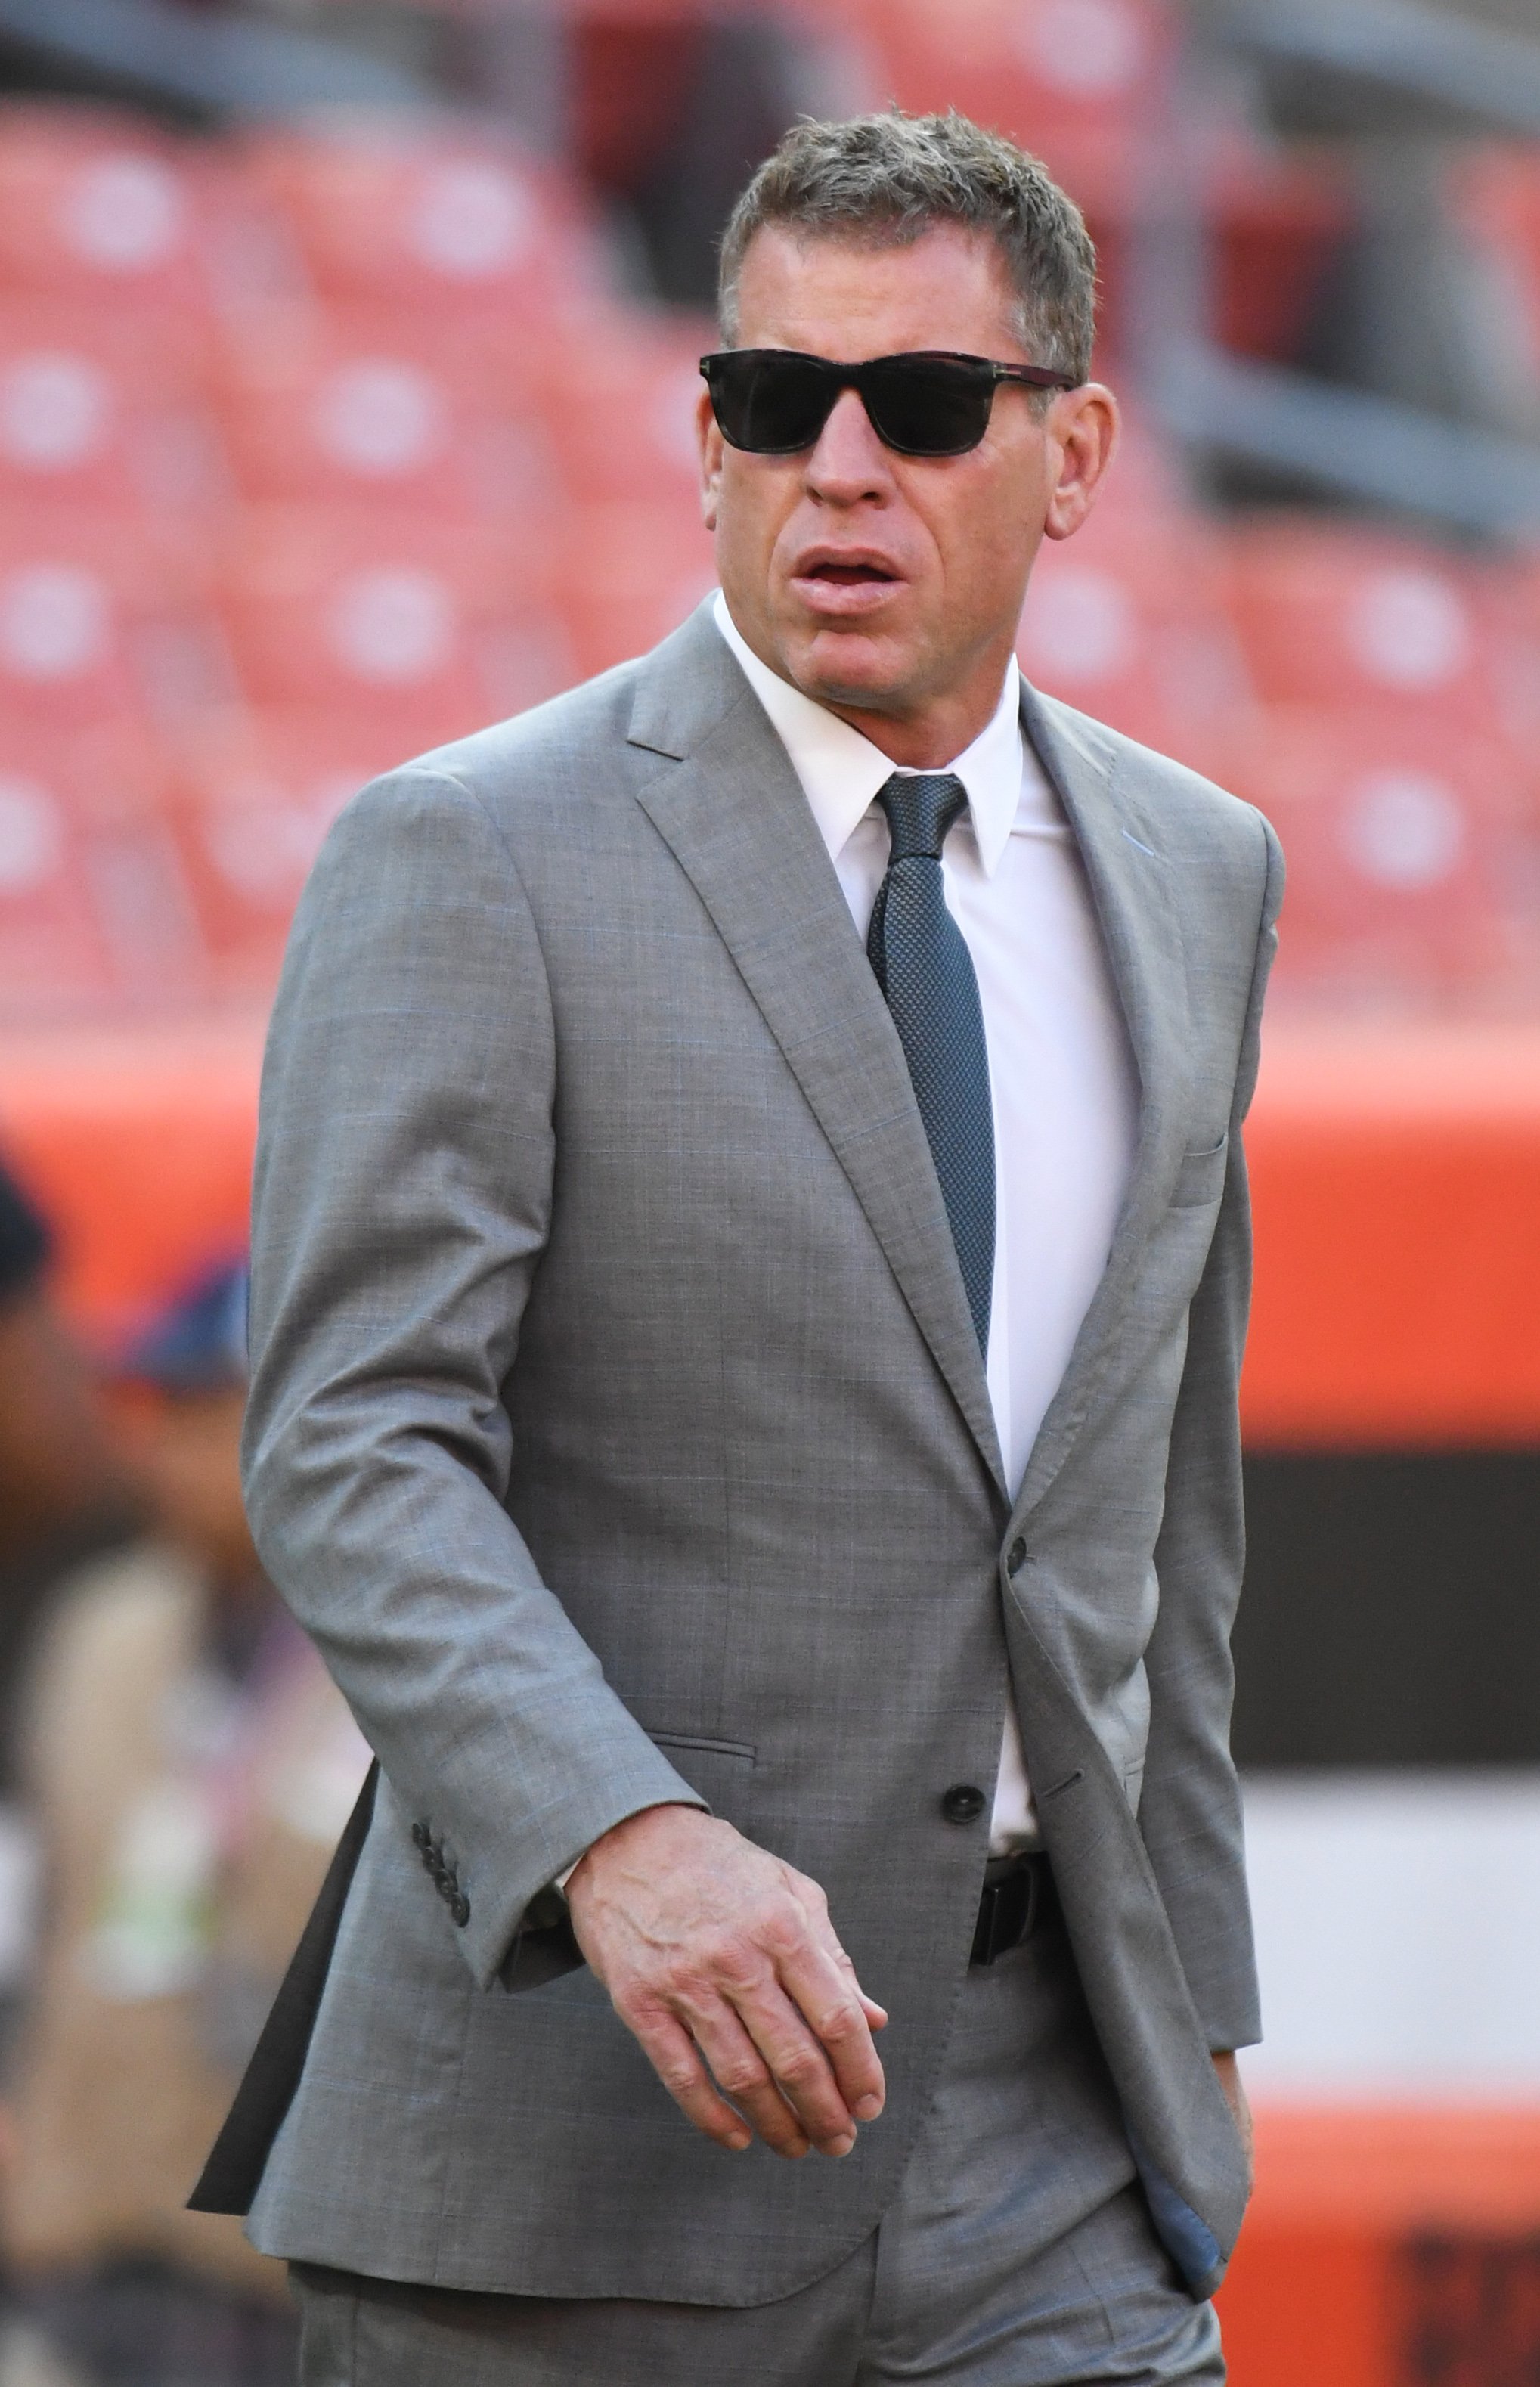 Troy Aikman walks onto the field prior to a pre-season game between the Philadelphia Eagles and Cleveland Browns on August 23, 2018, at FirstEnergy Stadium in Cleveland, Ohio | Source: Getty Images